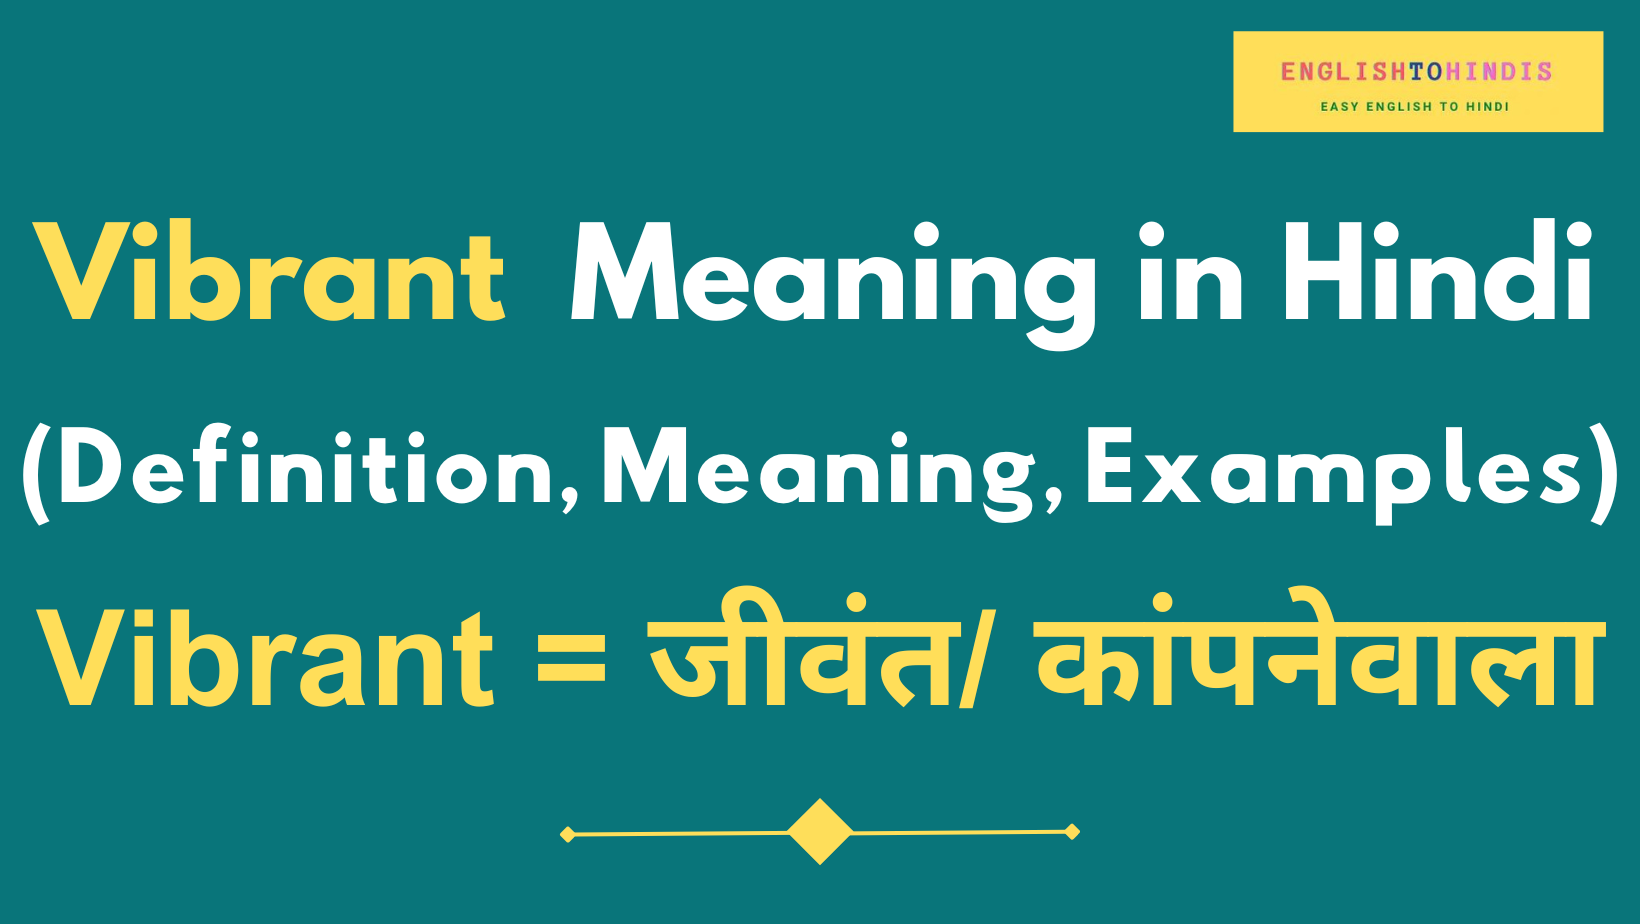 Vibrant Meaning in Hindi